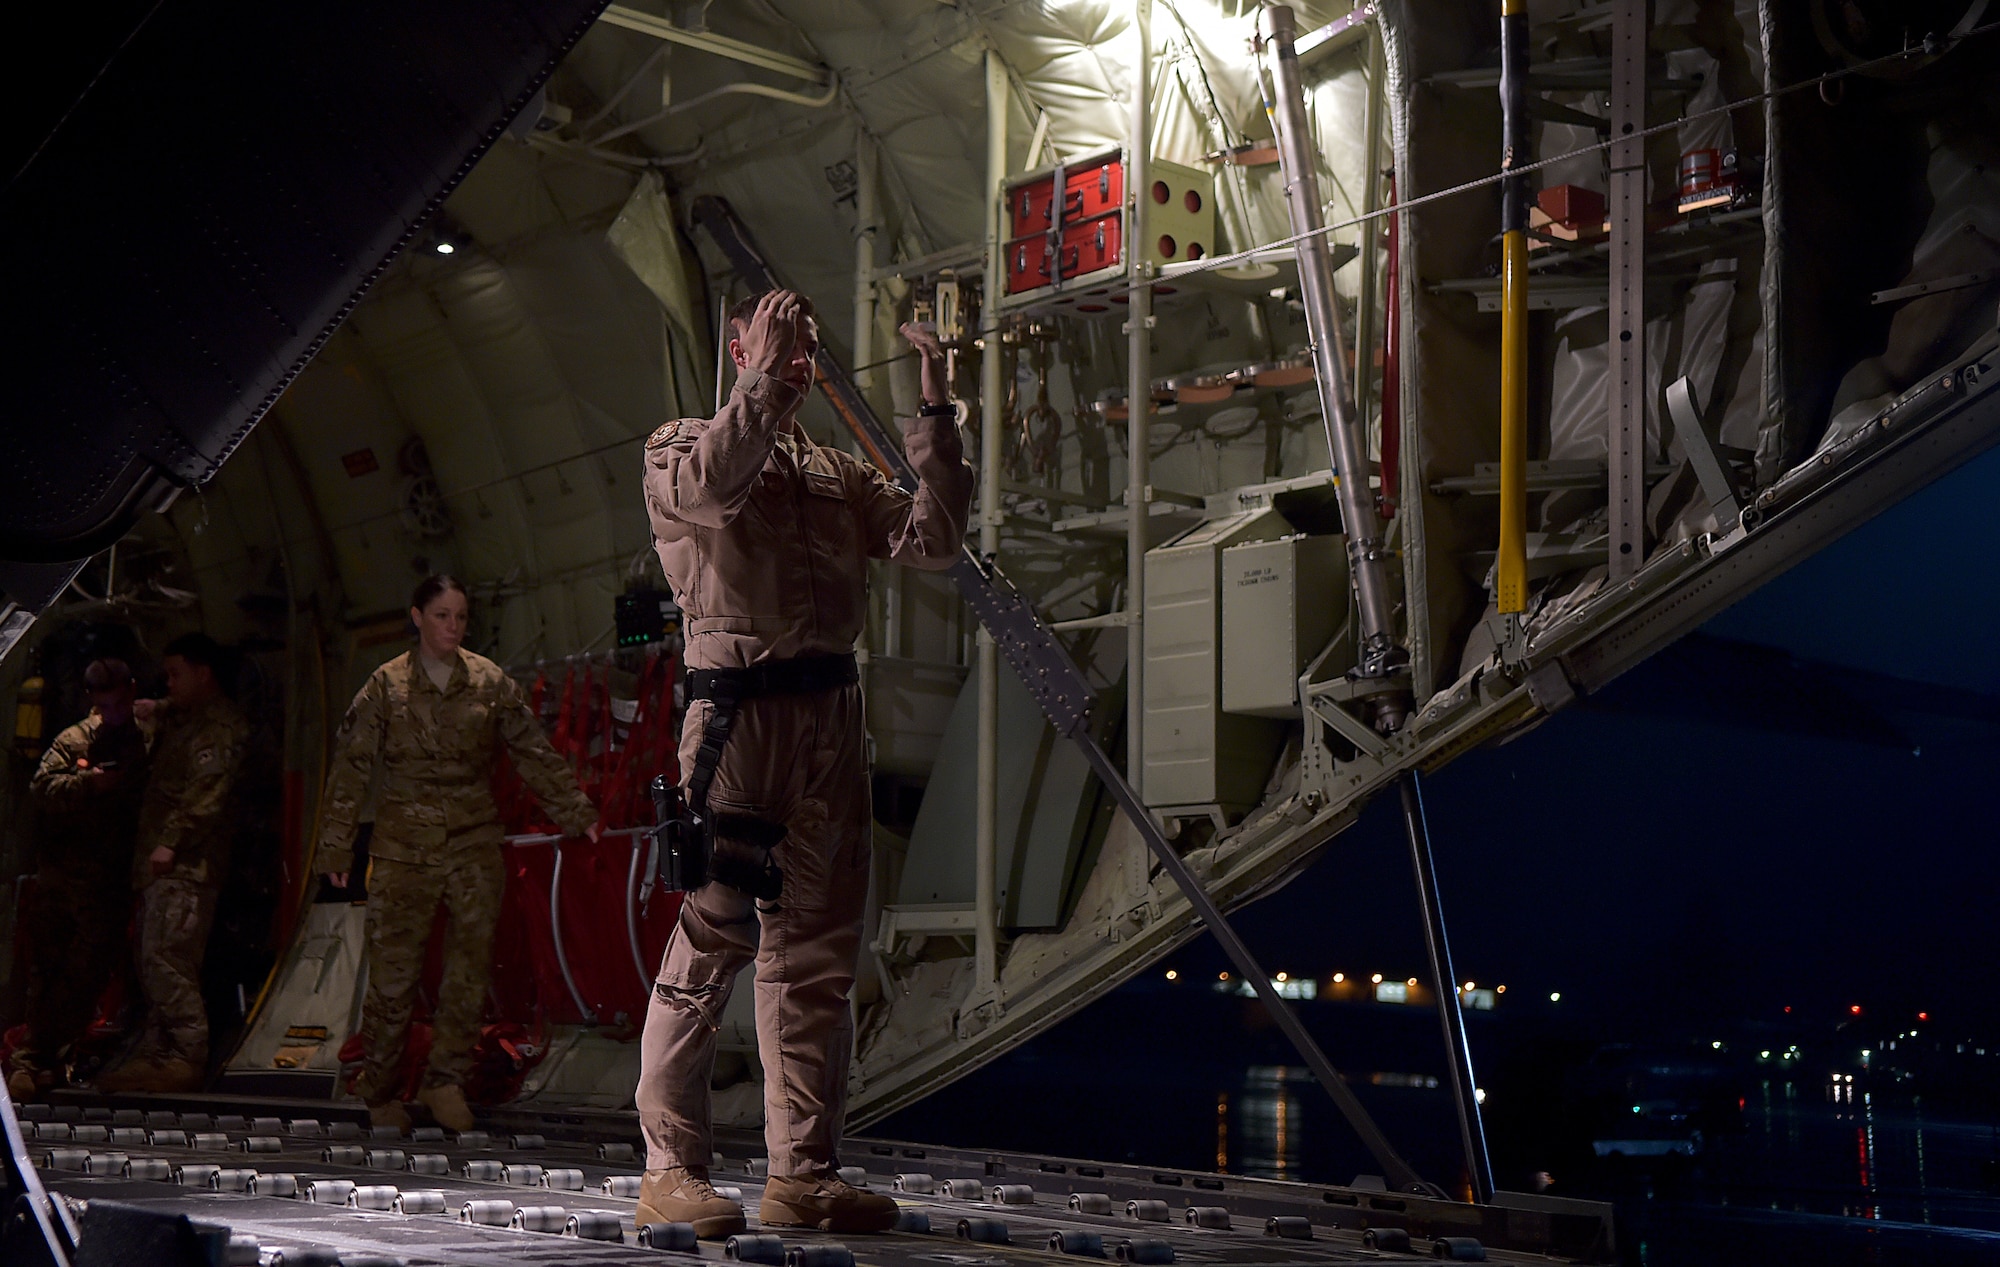 Senior Airman Christian McDevitt, load master with the 37th Airlift Squadron, leads a cargo loader to a C-130-J Super Hercules prior to a mission in support of the Ebola virus epidemic, Oct. 7, 2014, at Ramstein Air Base, Germany. As the Ebola outbreak becomes a potential global threat, U.S. Africa Command is working in support of the U.S. Agency for International Development, the lead federal agency (LFA), as part of a comprehensive U.S. Government effort to respond to and contain the outbreak of the Ebola virus in West Africa as quickly as possible.  This was the first C-130J Super Hercules flight launched from Ramstein to Monrovia, Liberia in support of Operation UNITED ASSISTANCE. (U.S. Air Force photo by/Staff Sgt. Sara Keller)